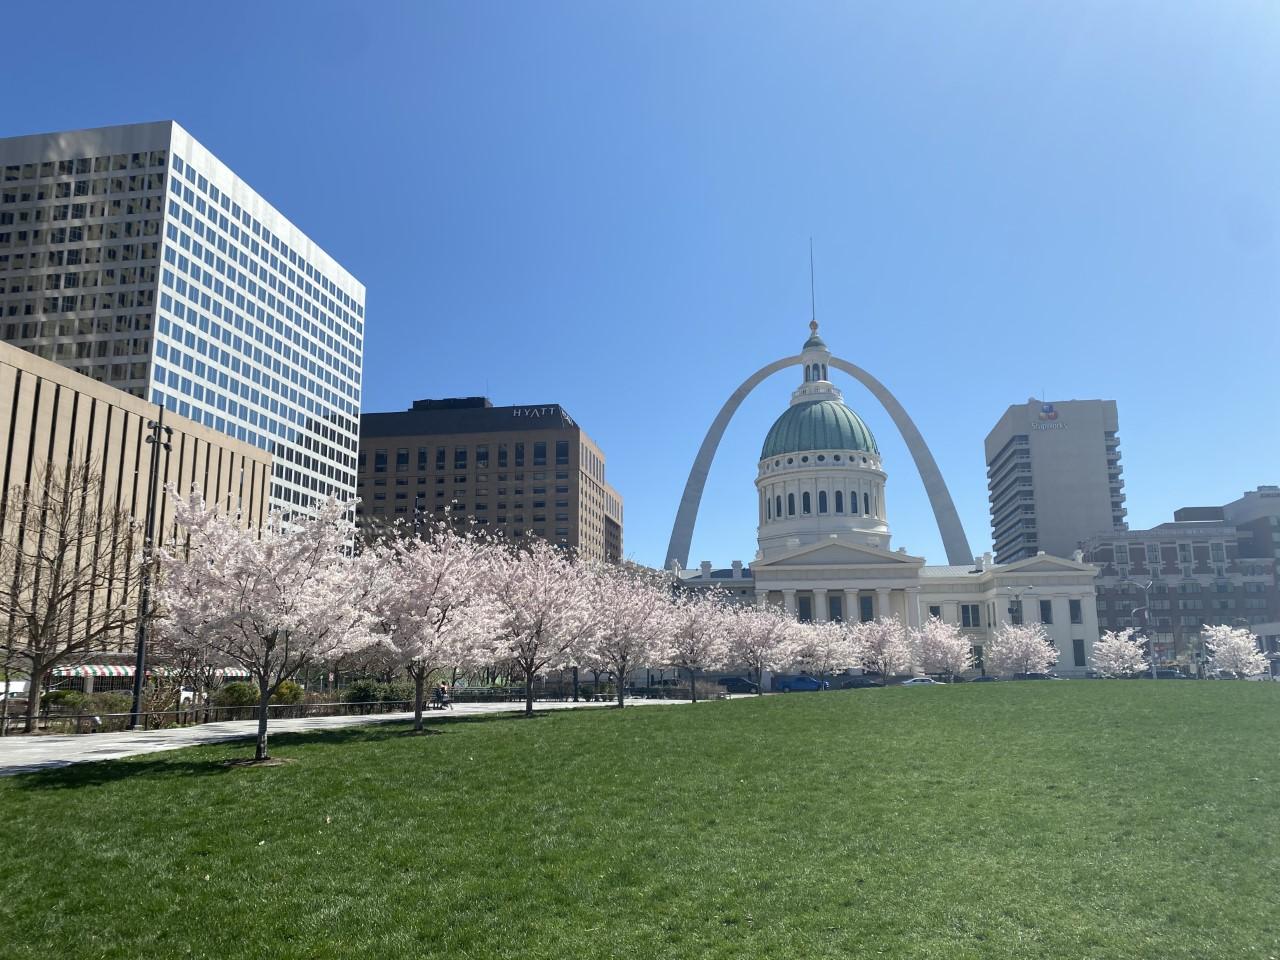 The Gateway Arch and Old Courthouse with a row of pink blooming cherry trees in front